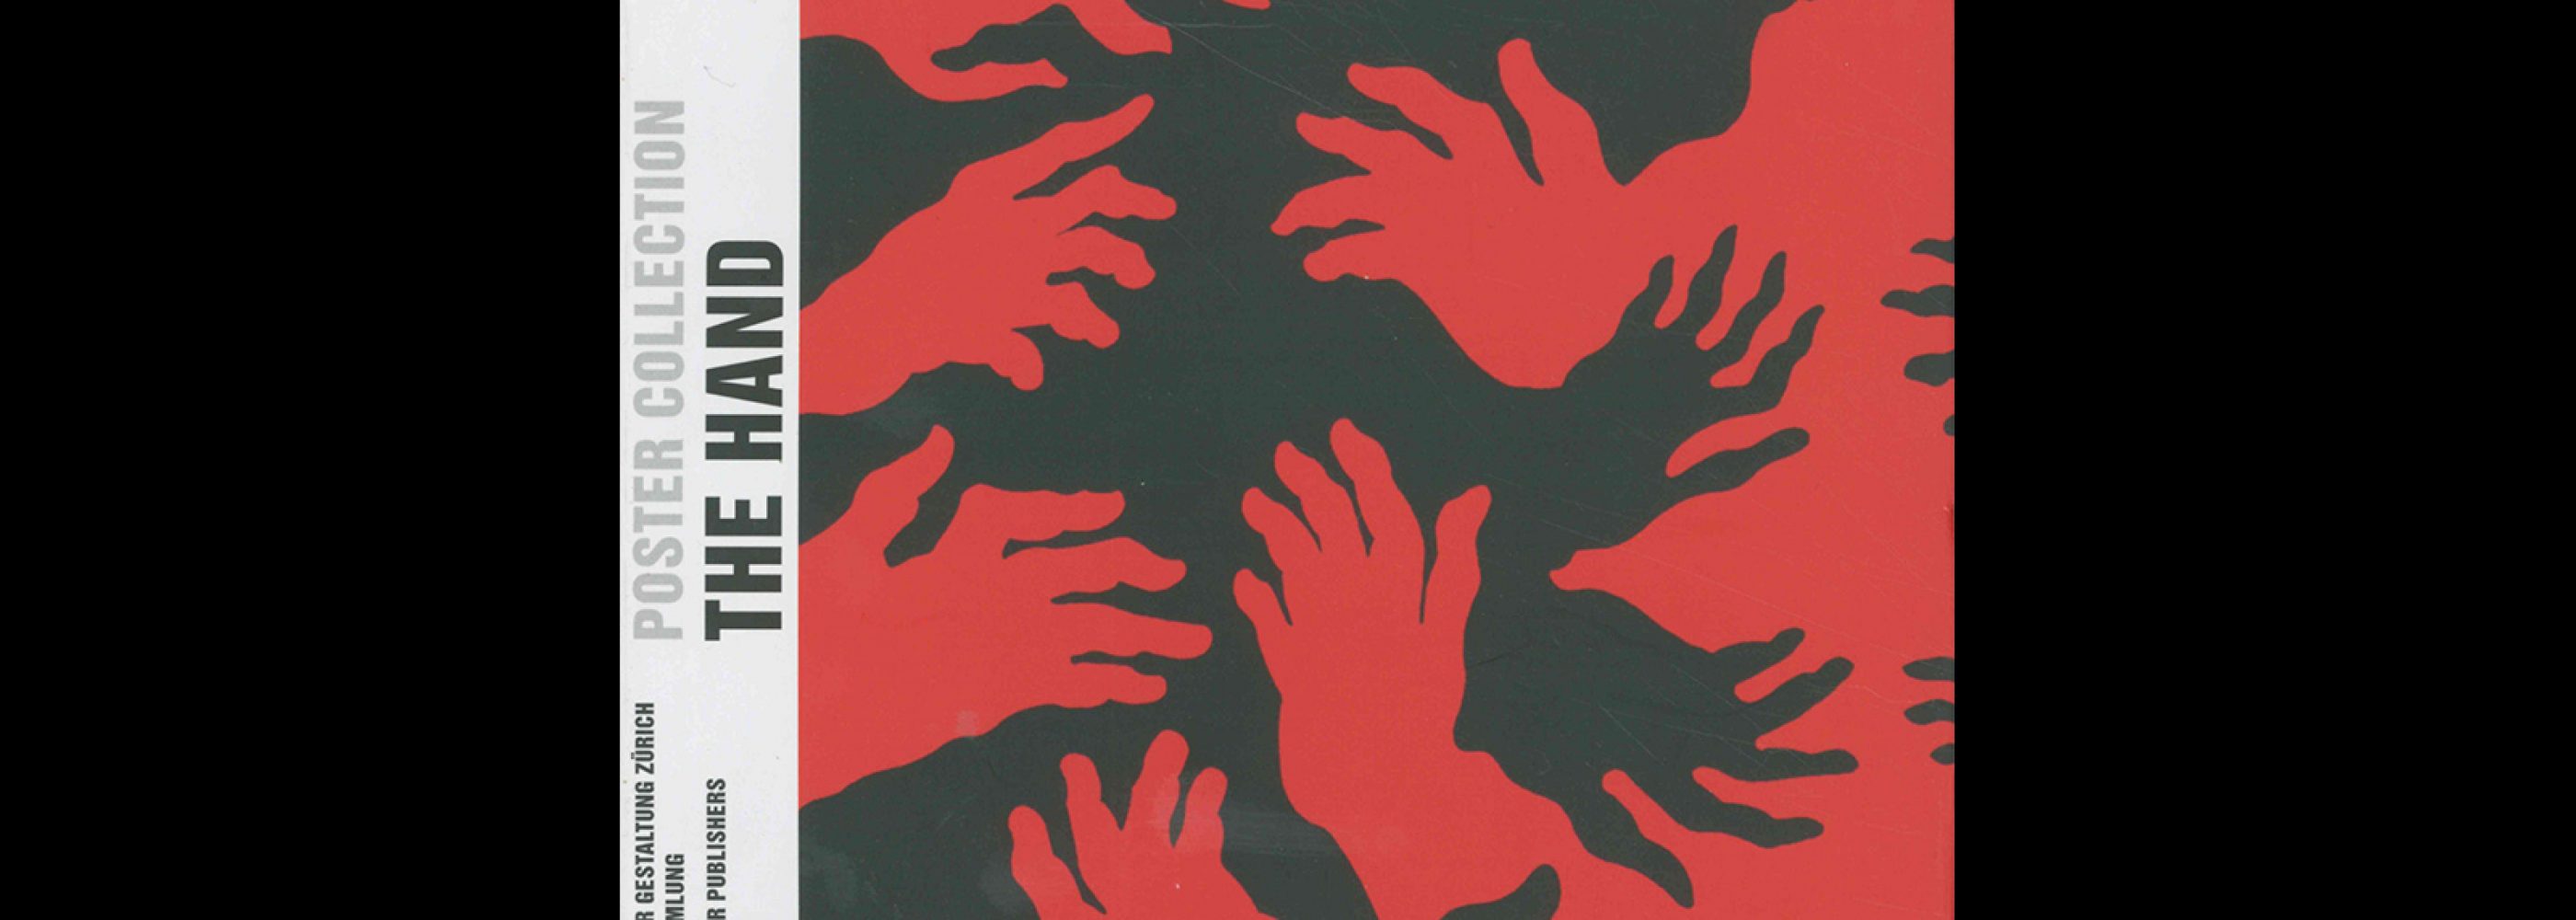 The Hand : Die Hand, Poster Collection 27, 2015